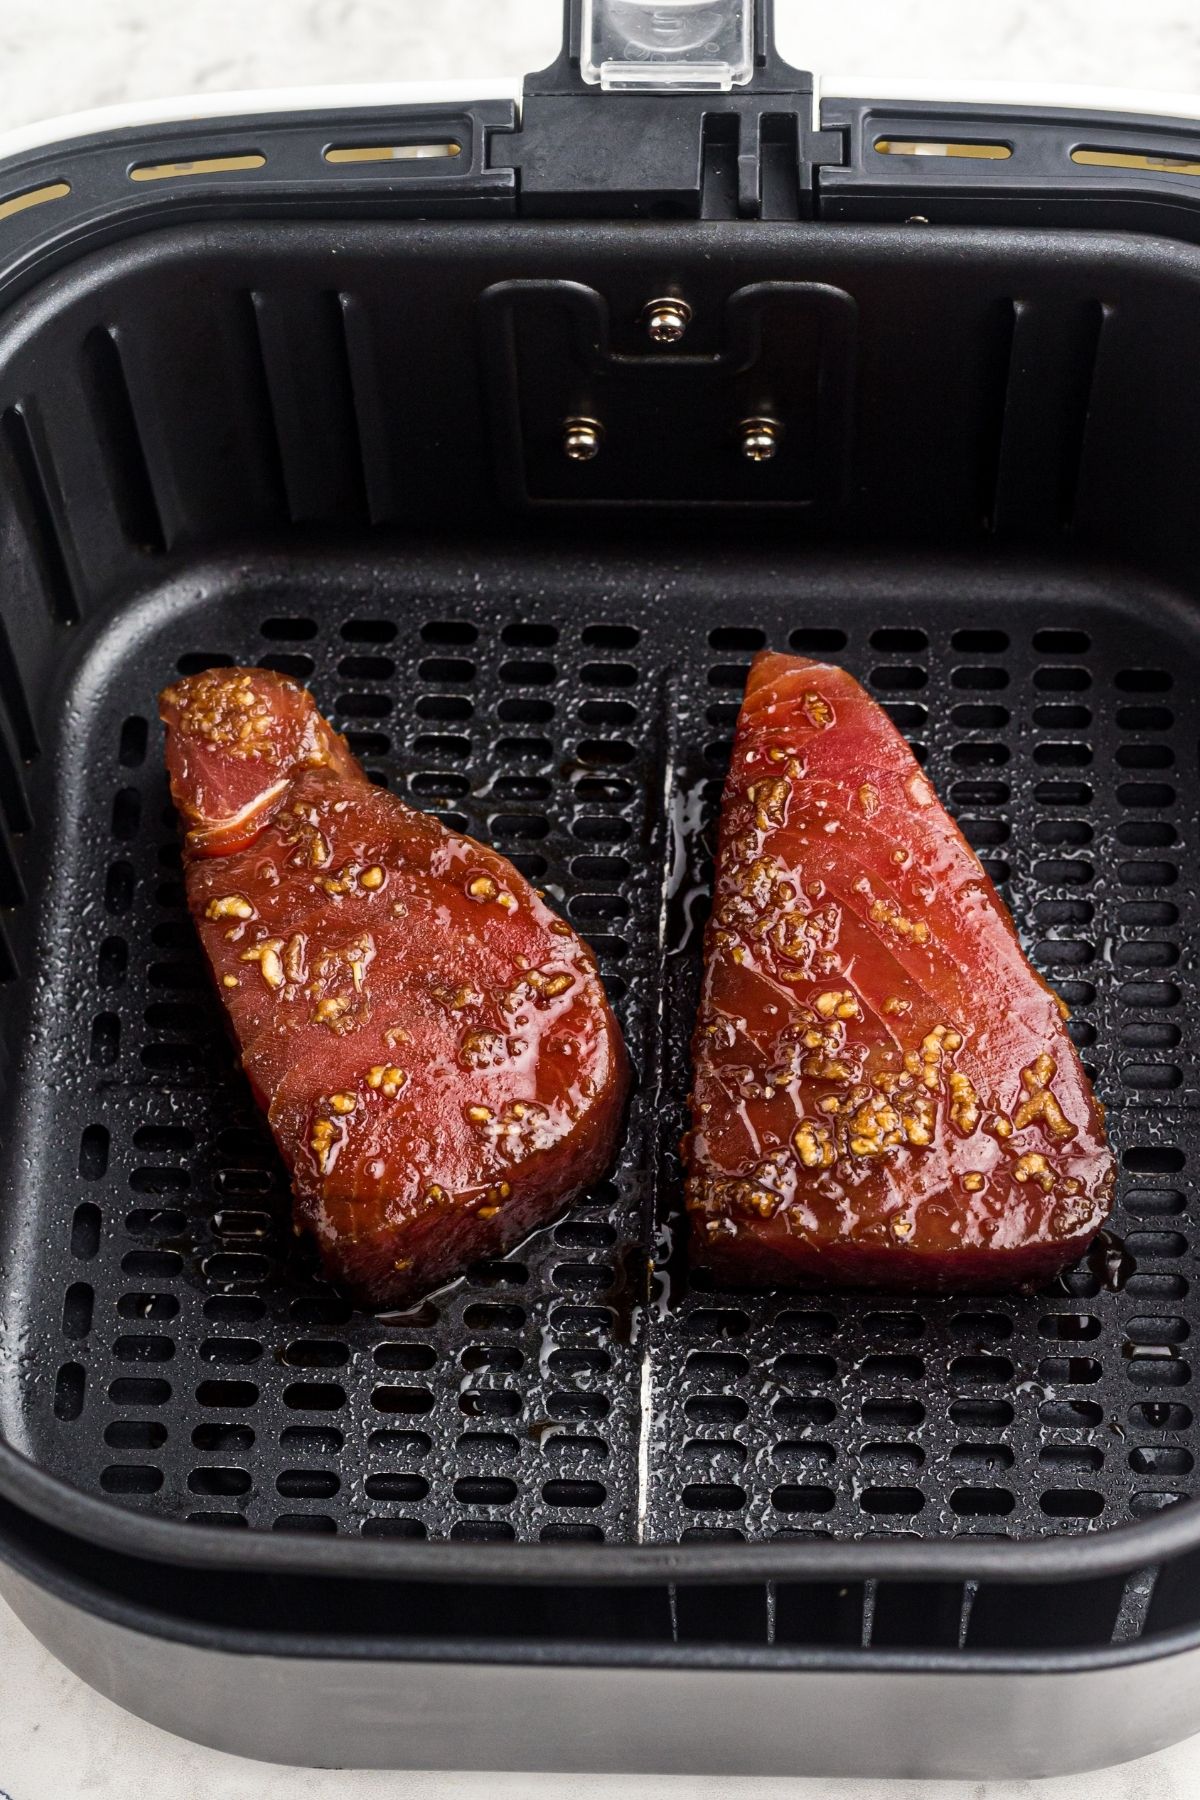 Marinated tuna steaks in the air fryer basket before being cooked